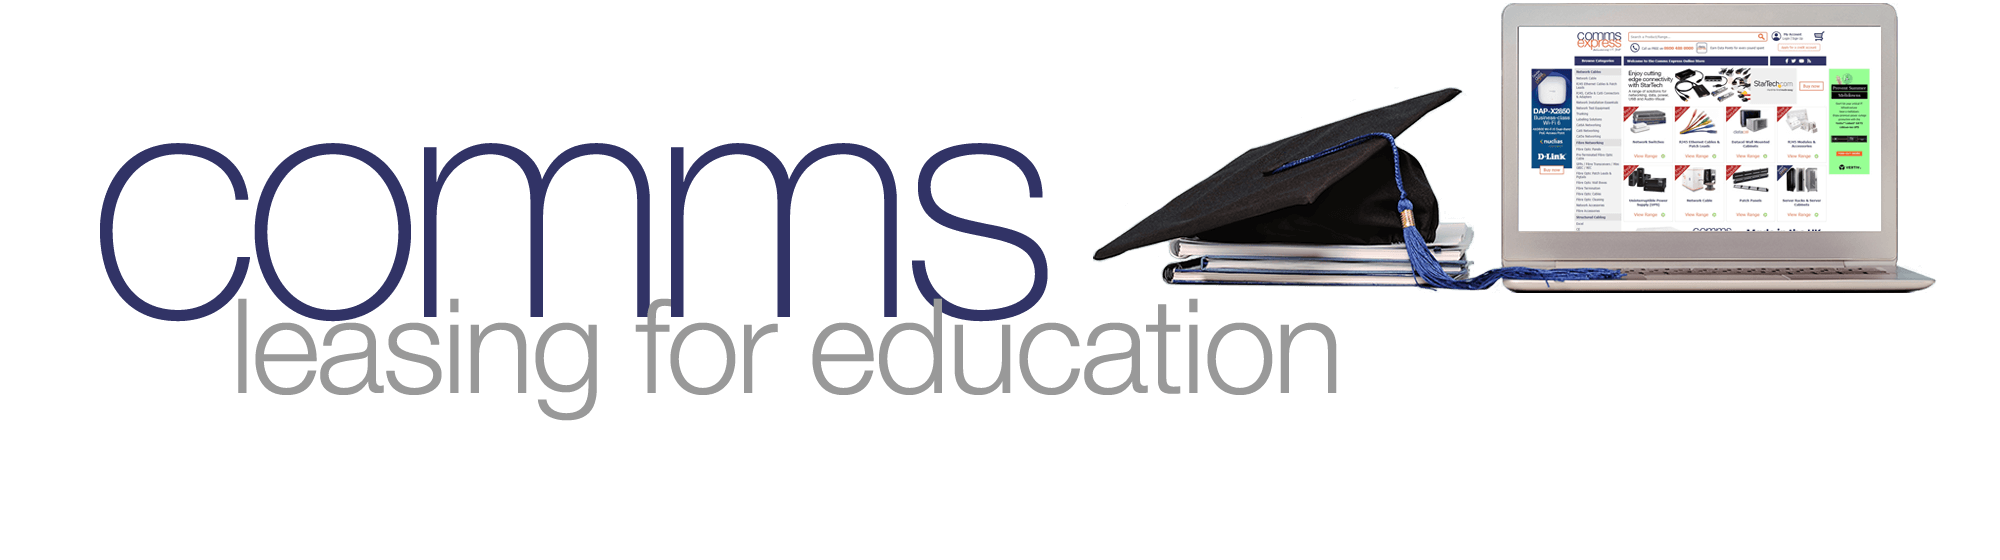 Comms leasing for education logo